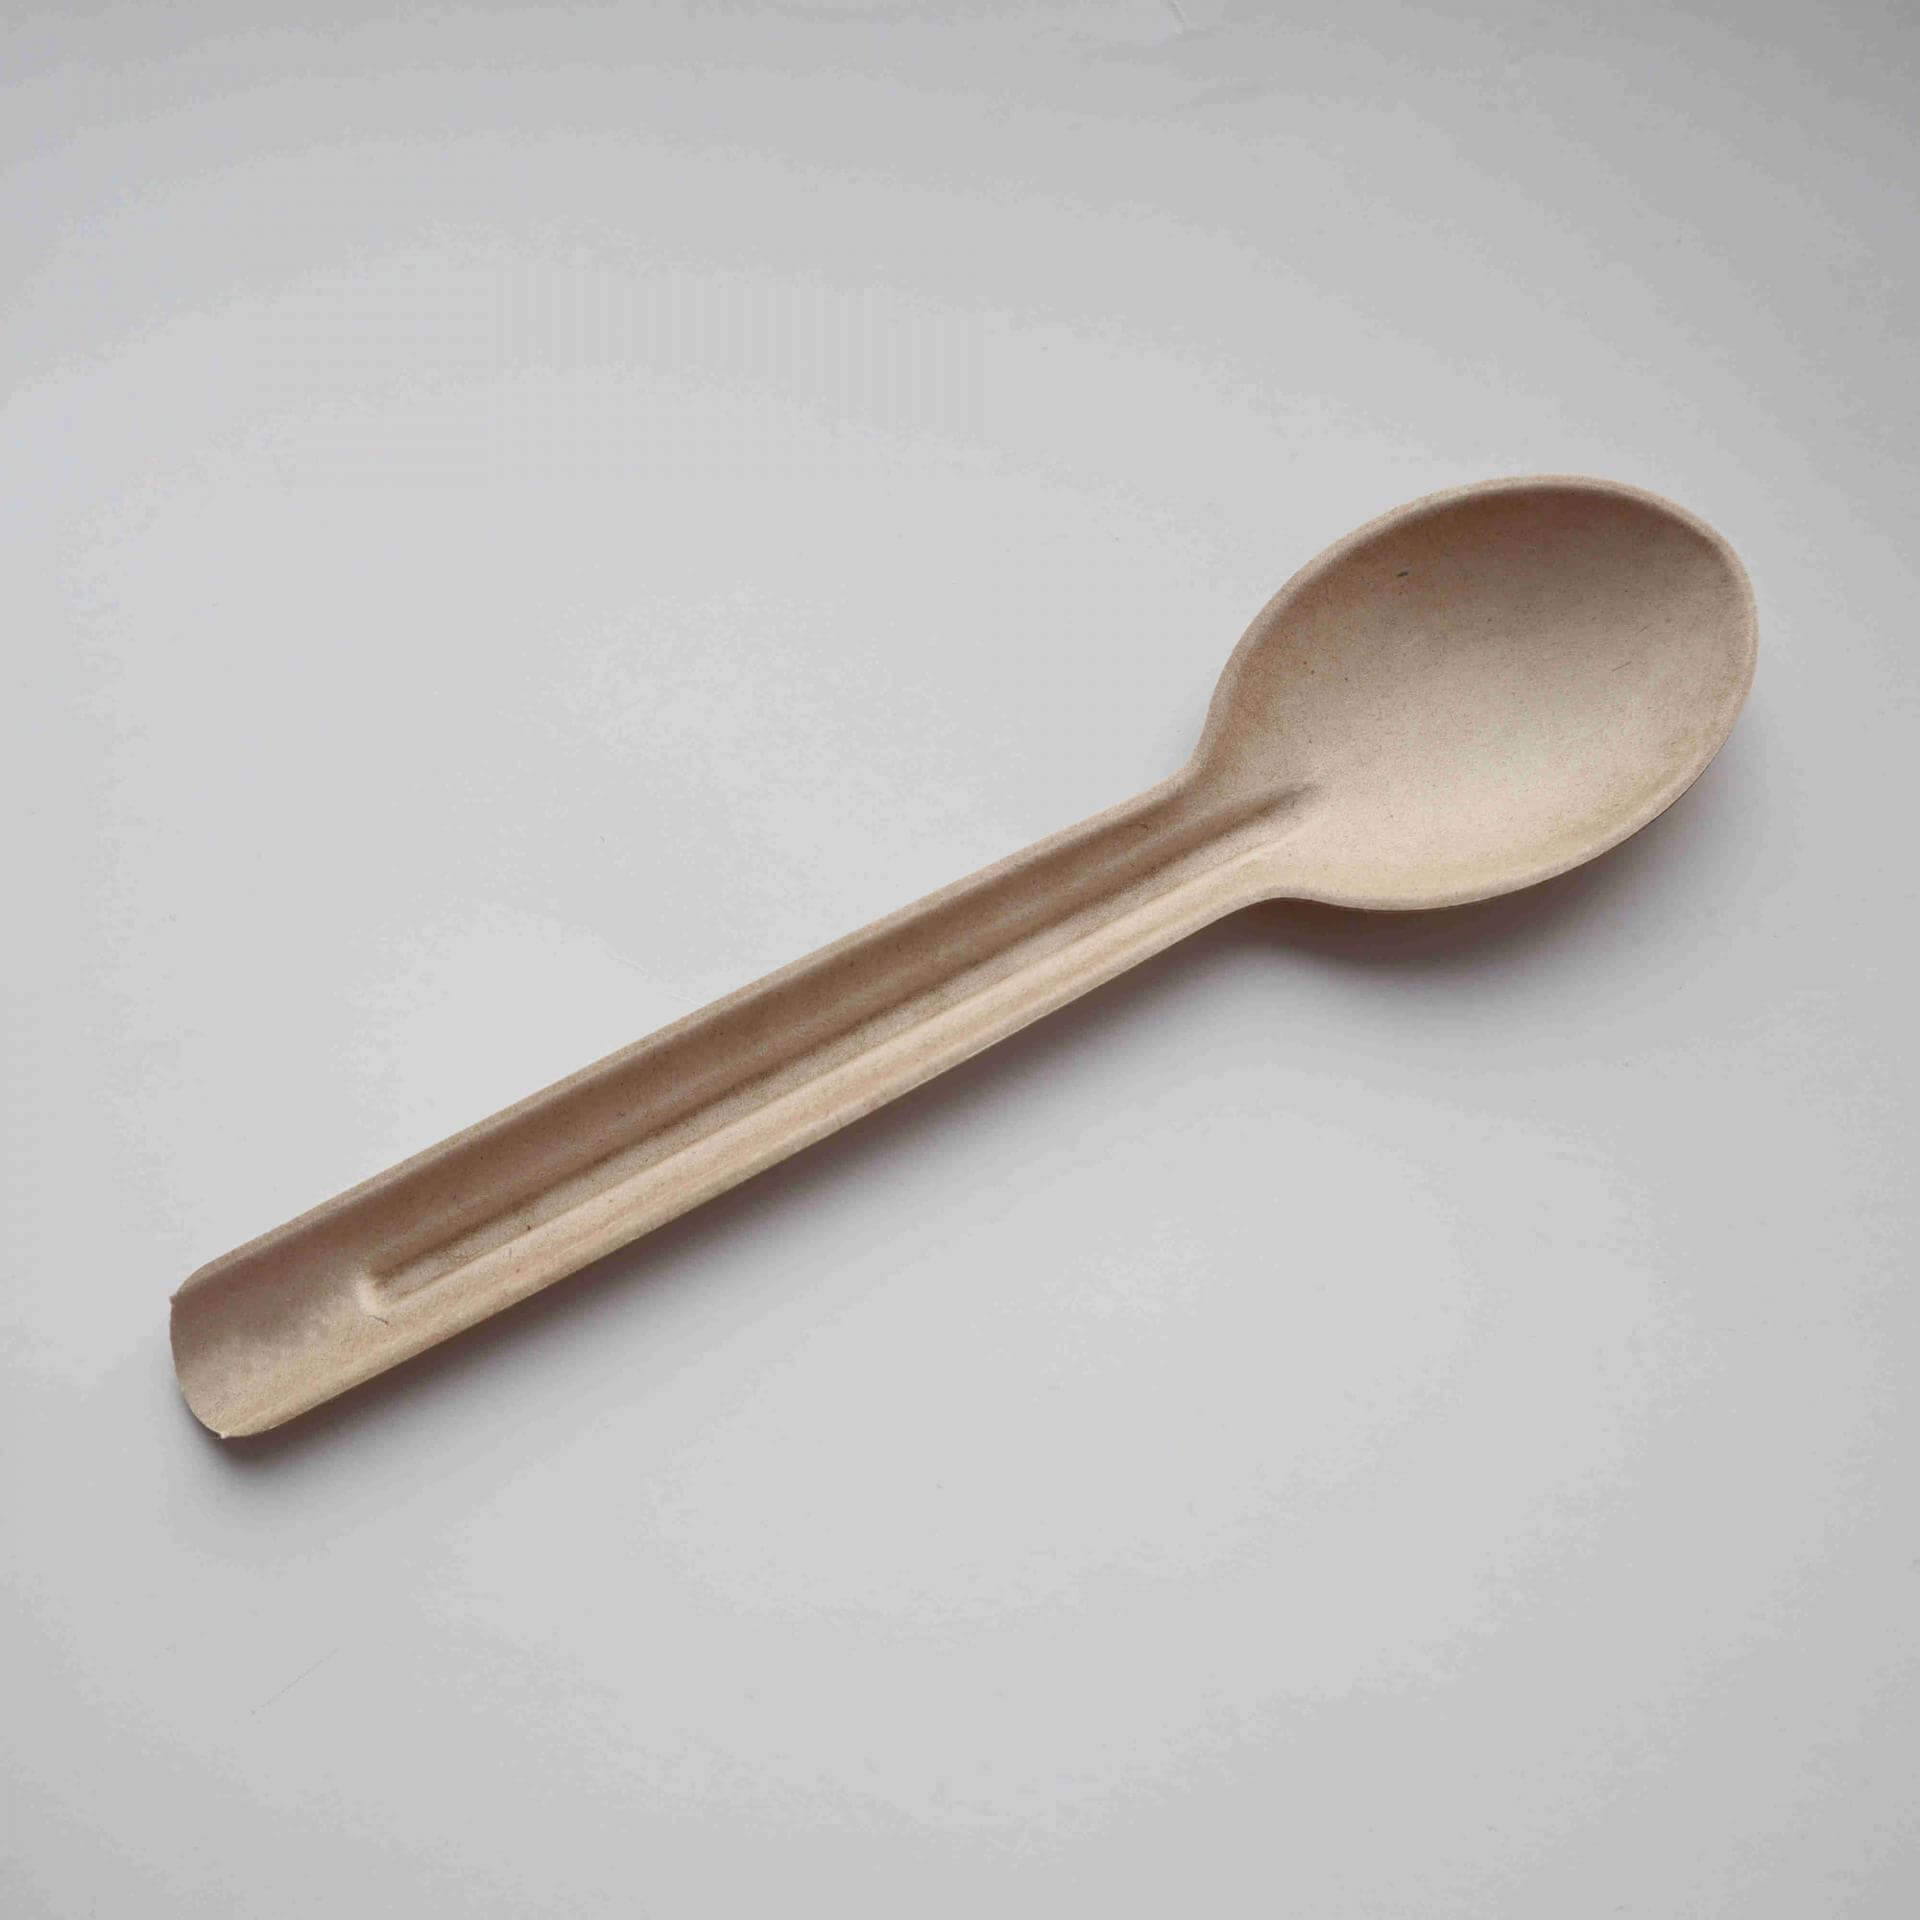 165mm biodegradable spoon for dinner, compostable spoons